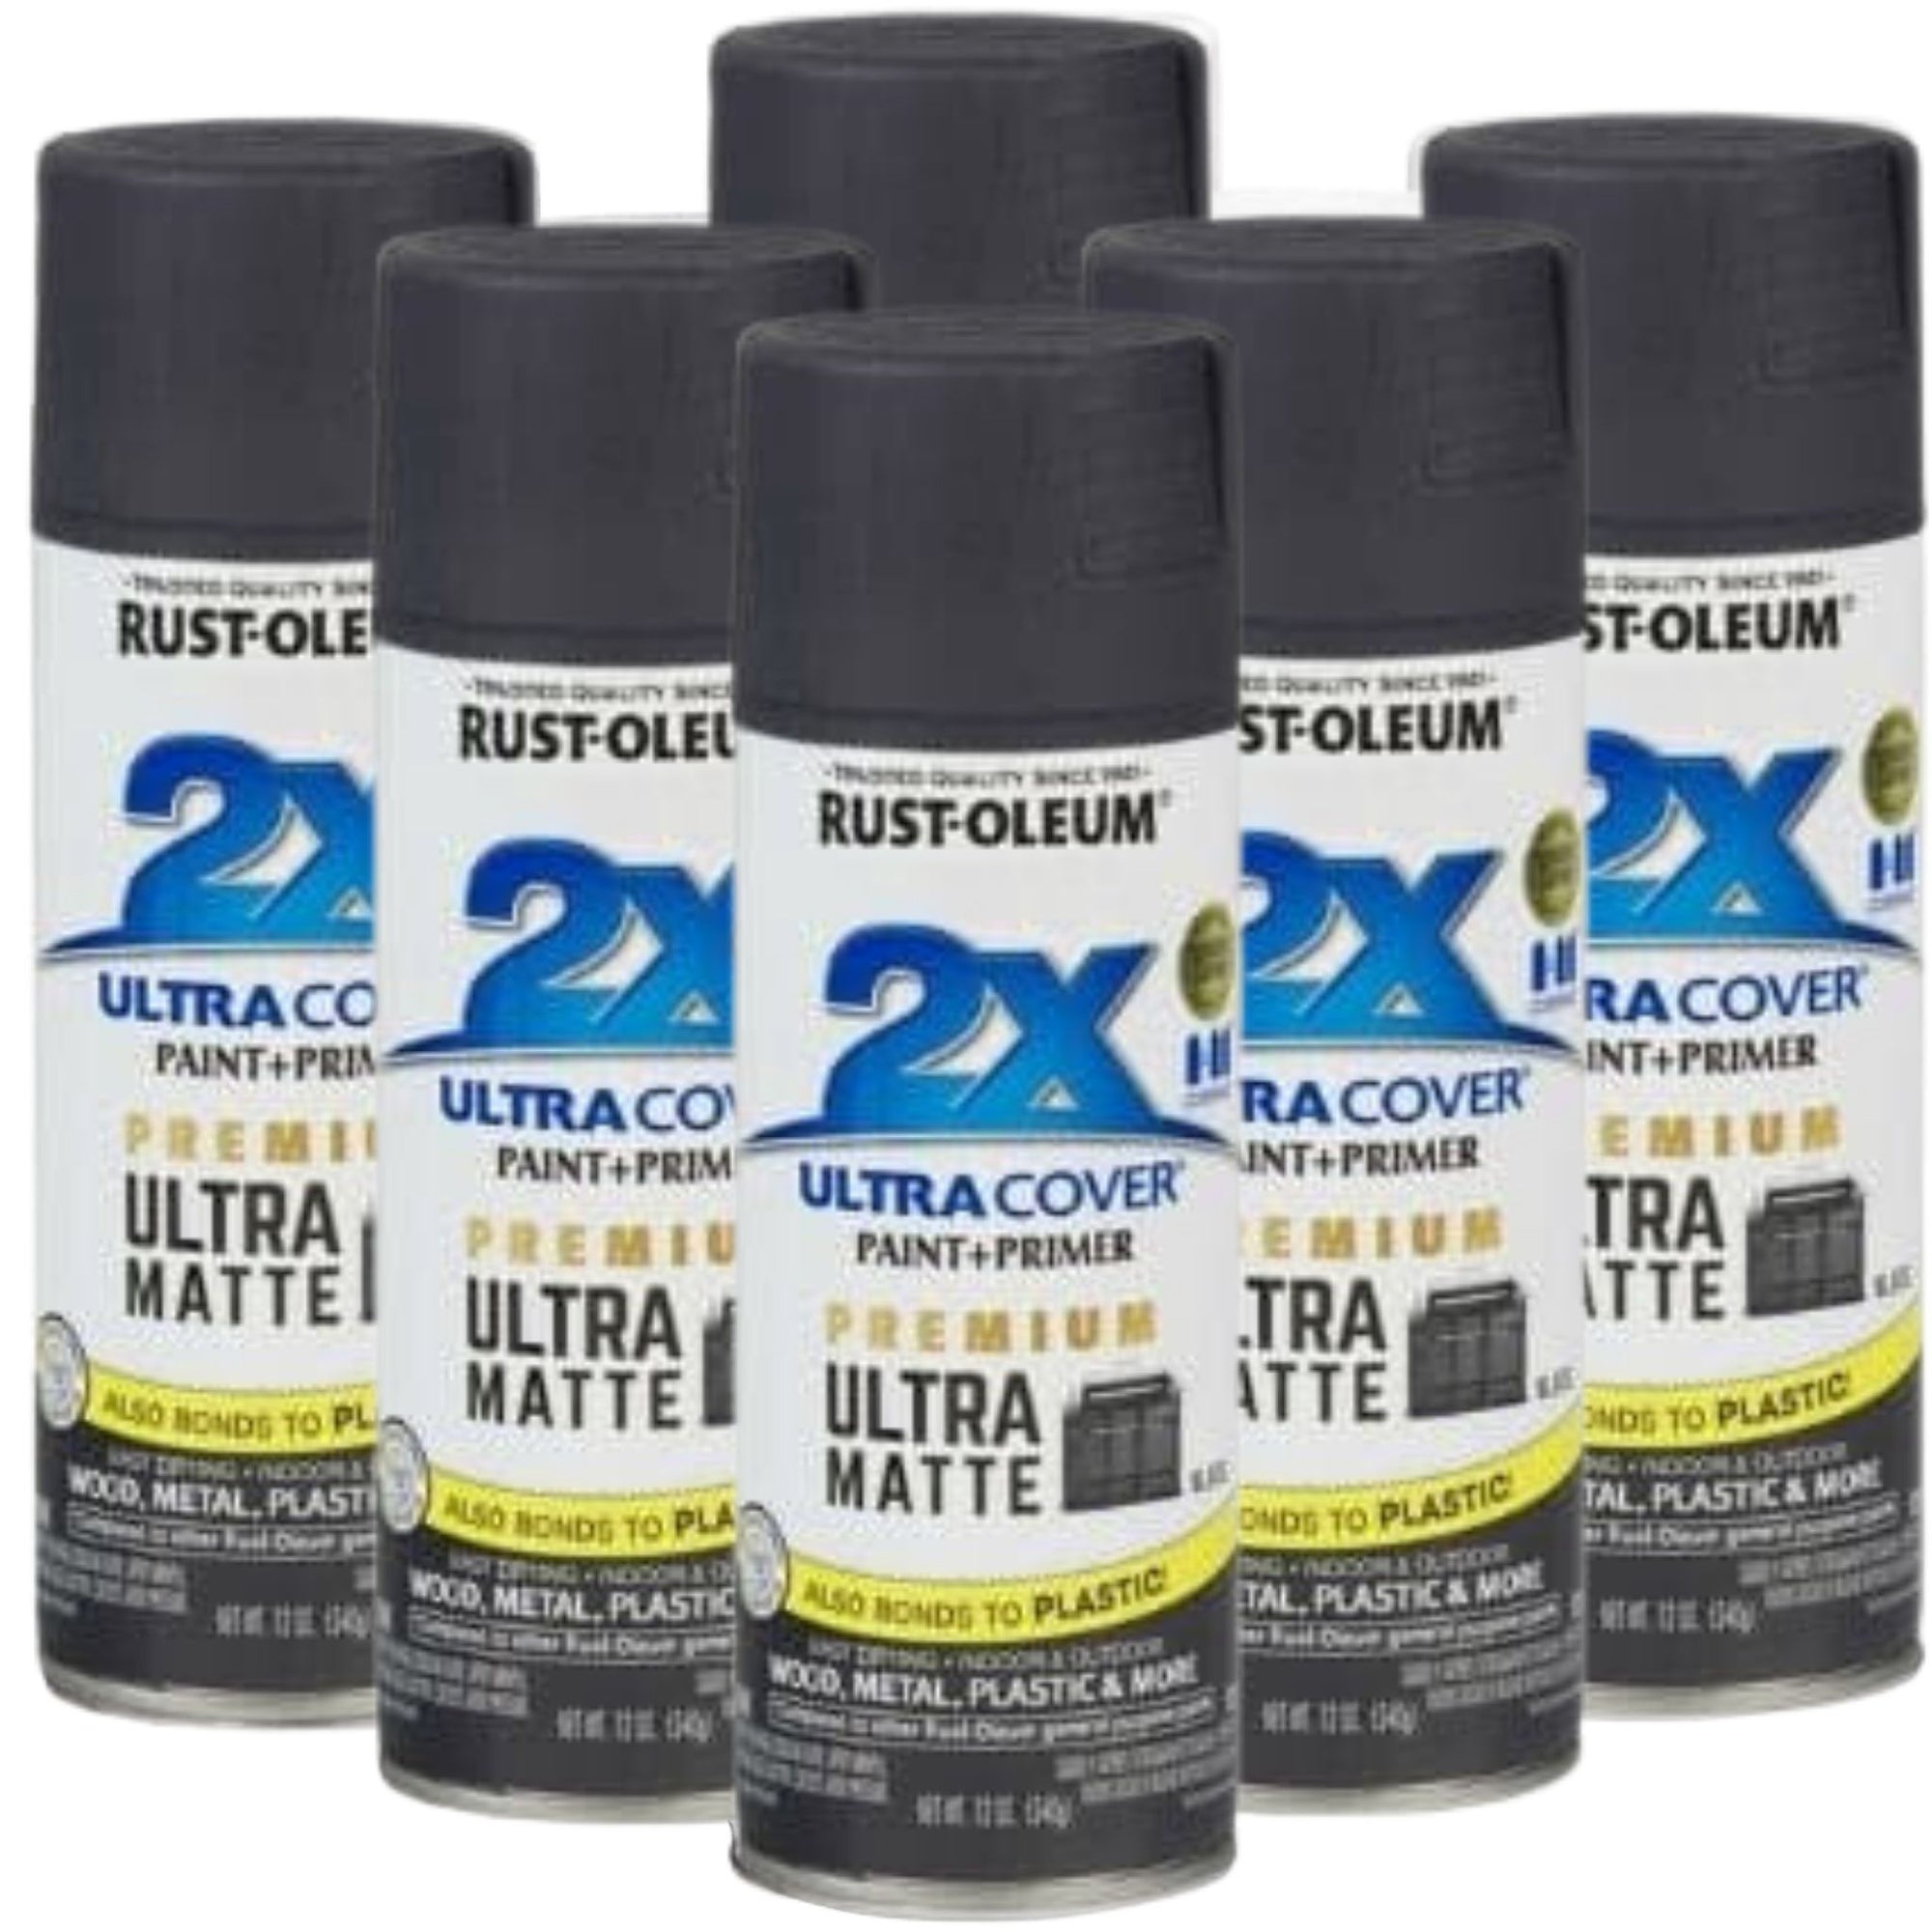 6 Cans | RUST-OLEUM 2X ULTRA COVER PAINT & PRIMER IN ONE | 357856 MATT BLACK - South East Clearance Centre